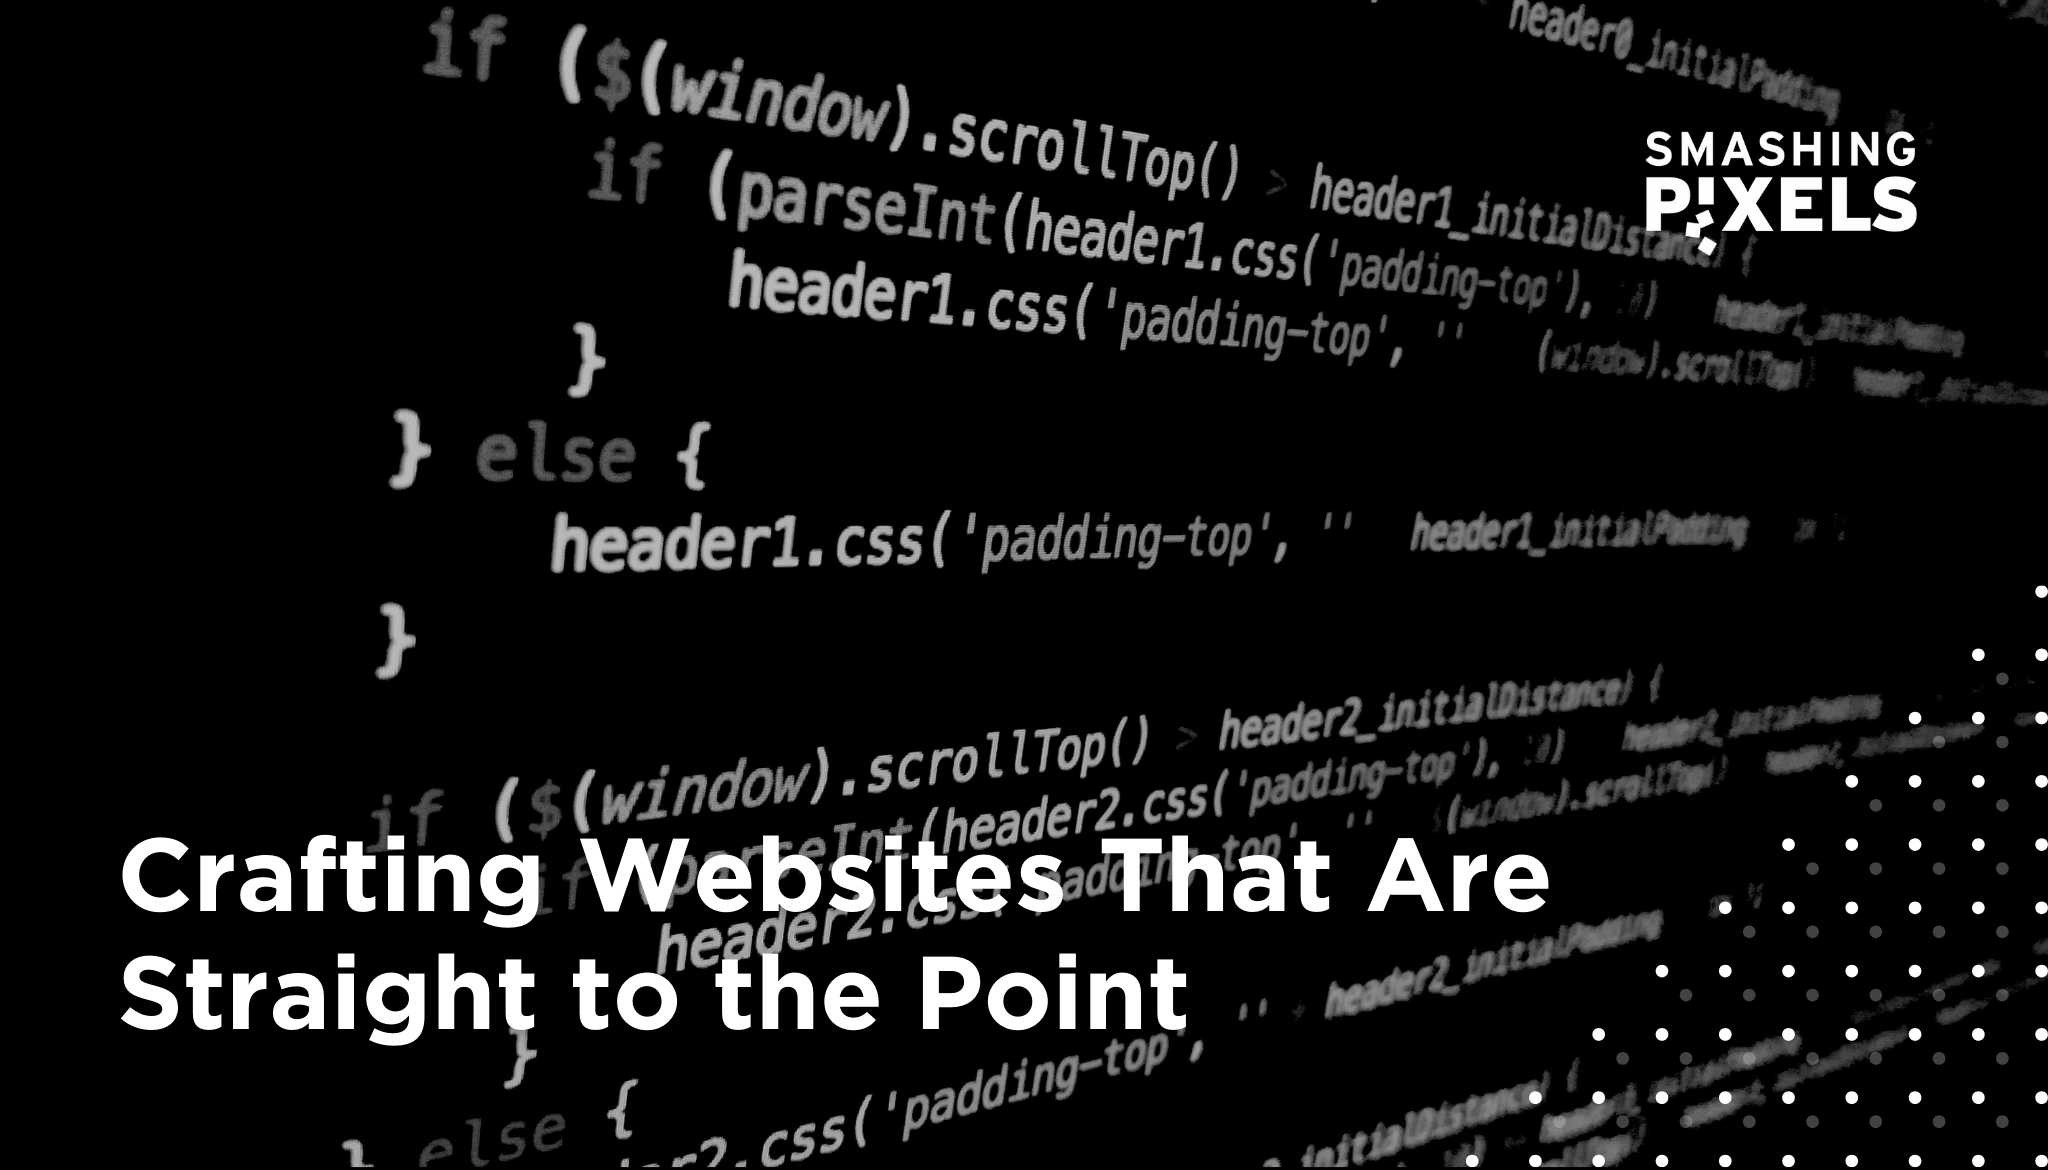 Clarity in Complexity: Crafting Websites That Are Straight to the Point